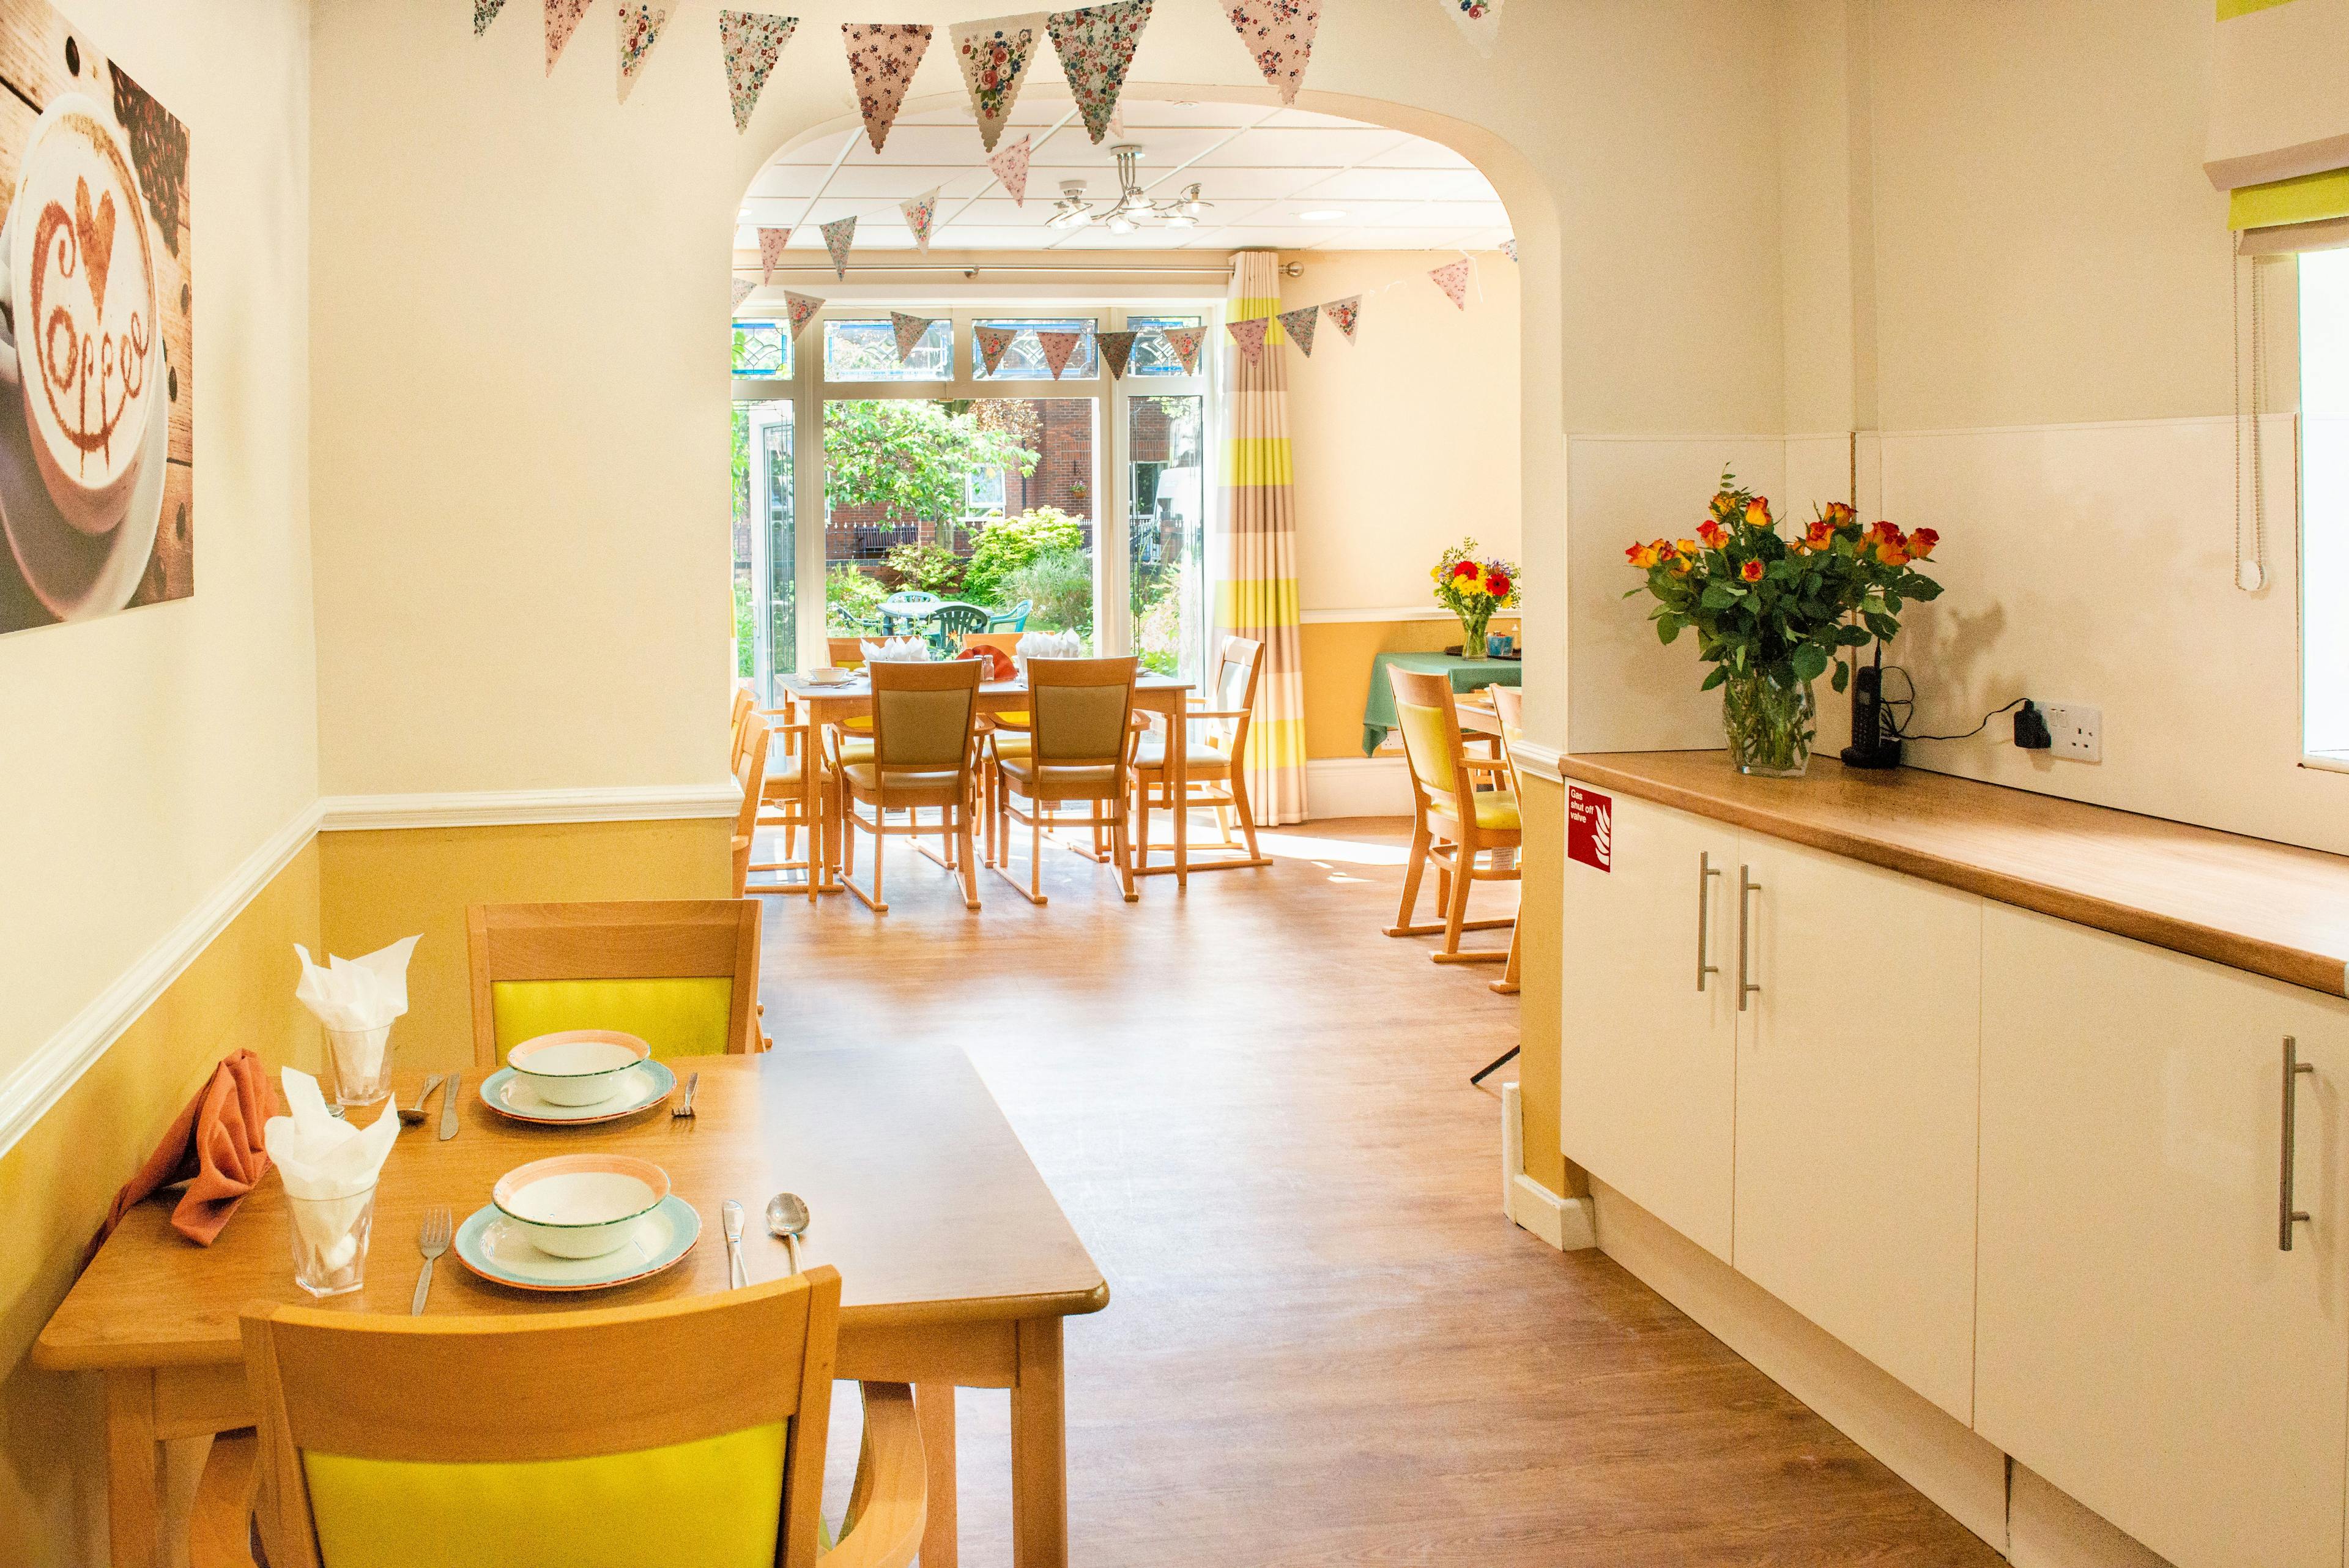 Ashmere Derbyshire - The Firs care home 003